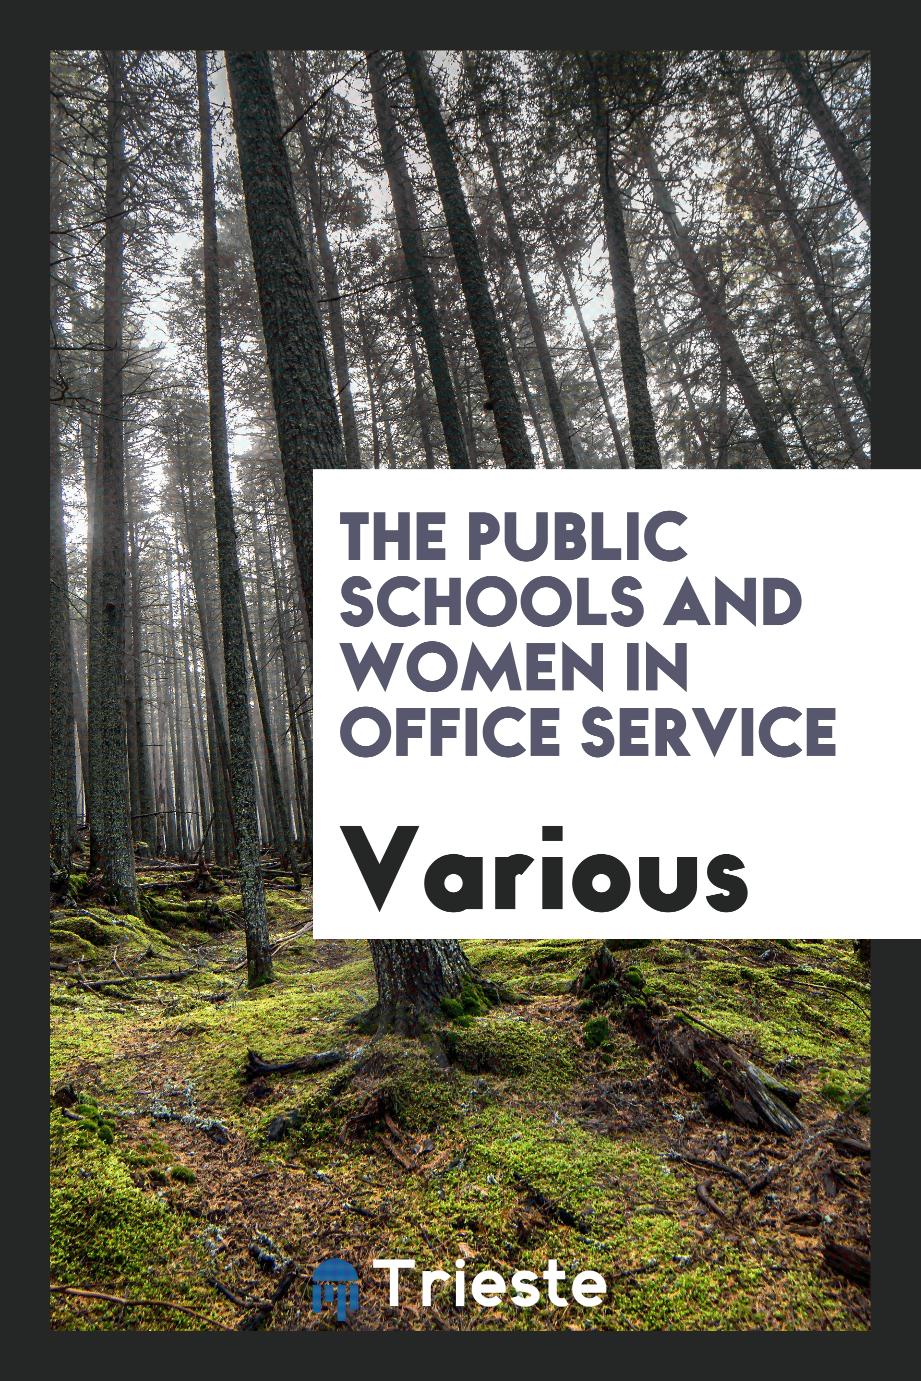 The Public Schools and Women in Office Service